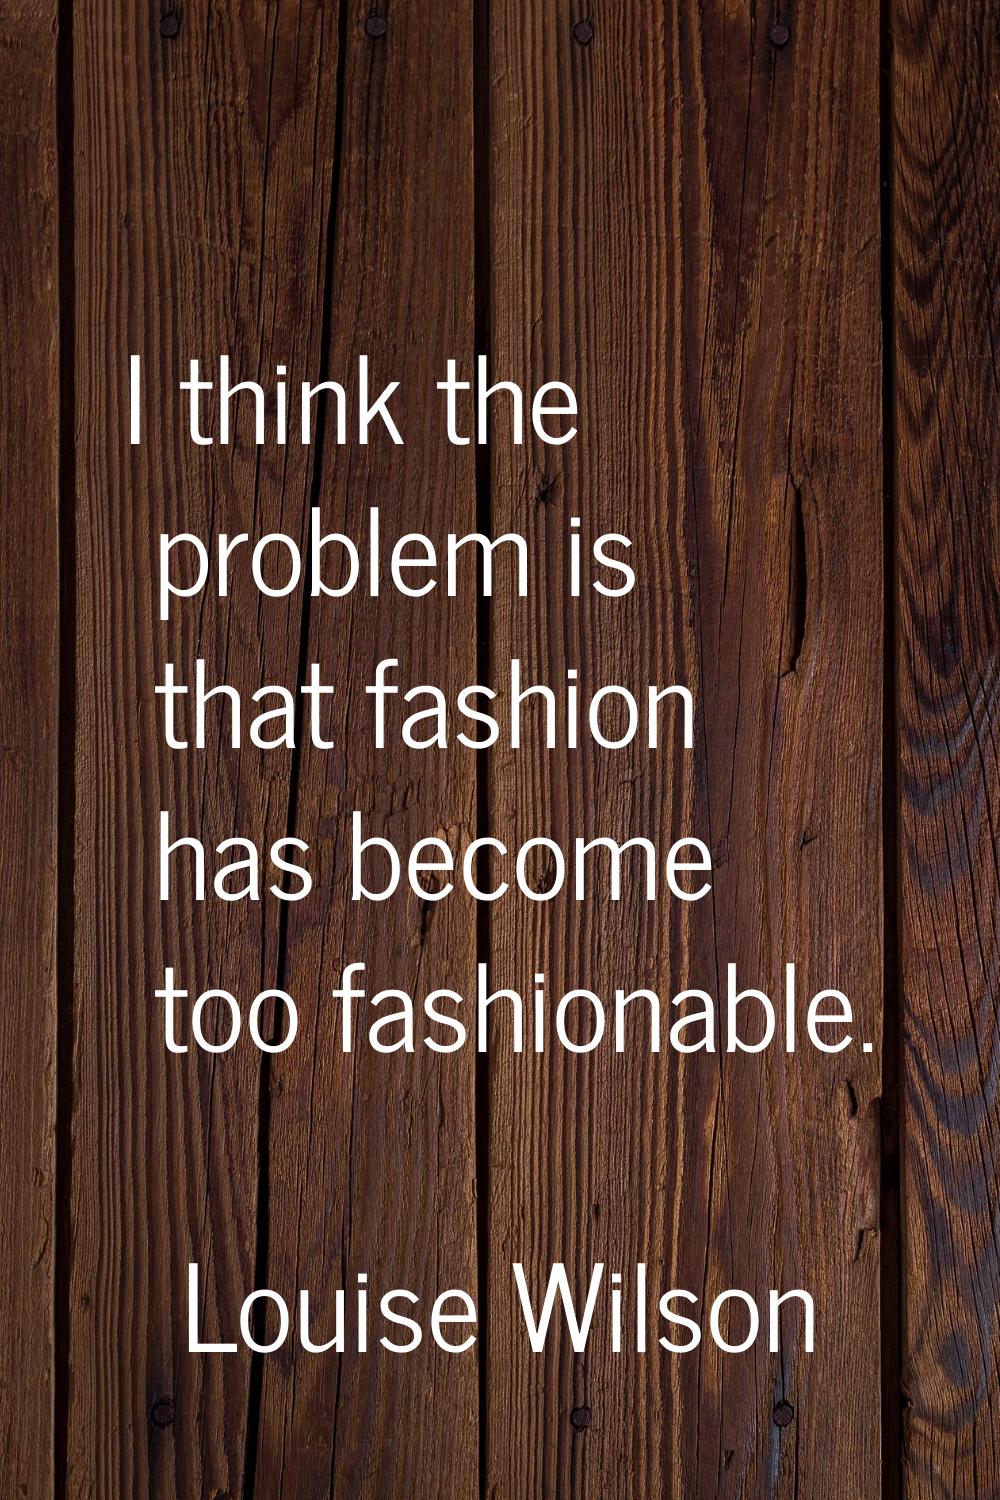 I think the problem is that fashion has become too fashionable.